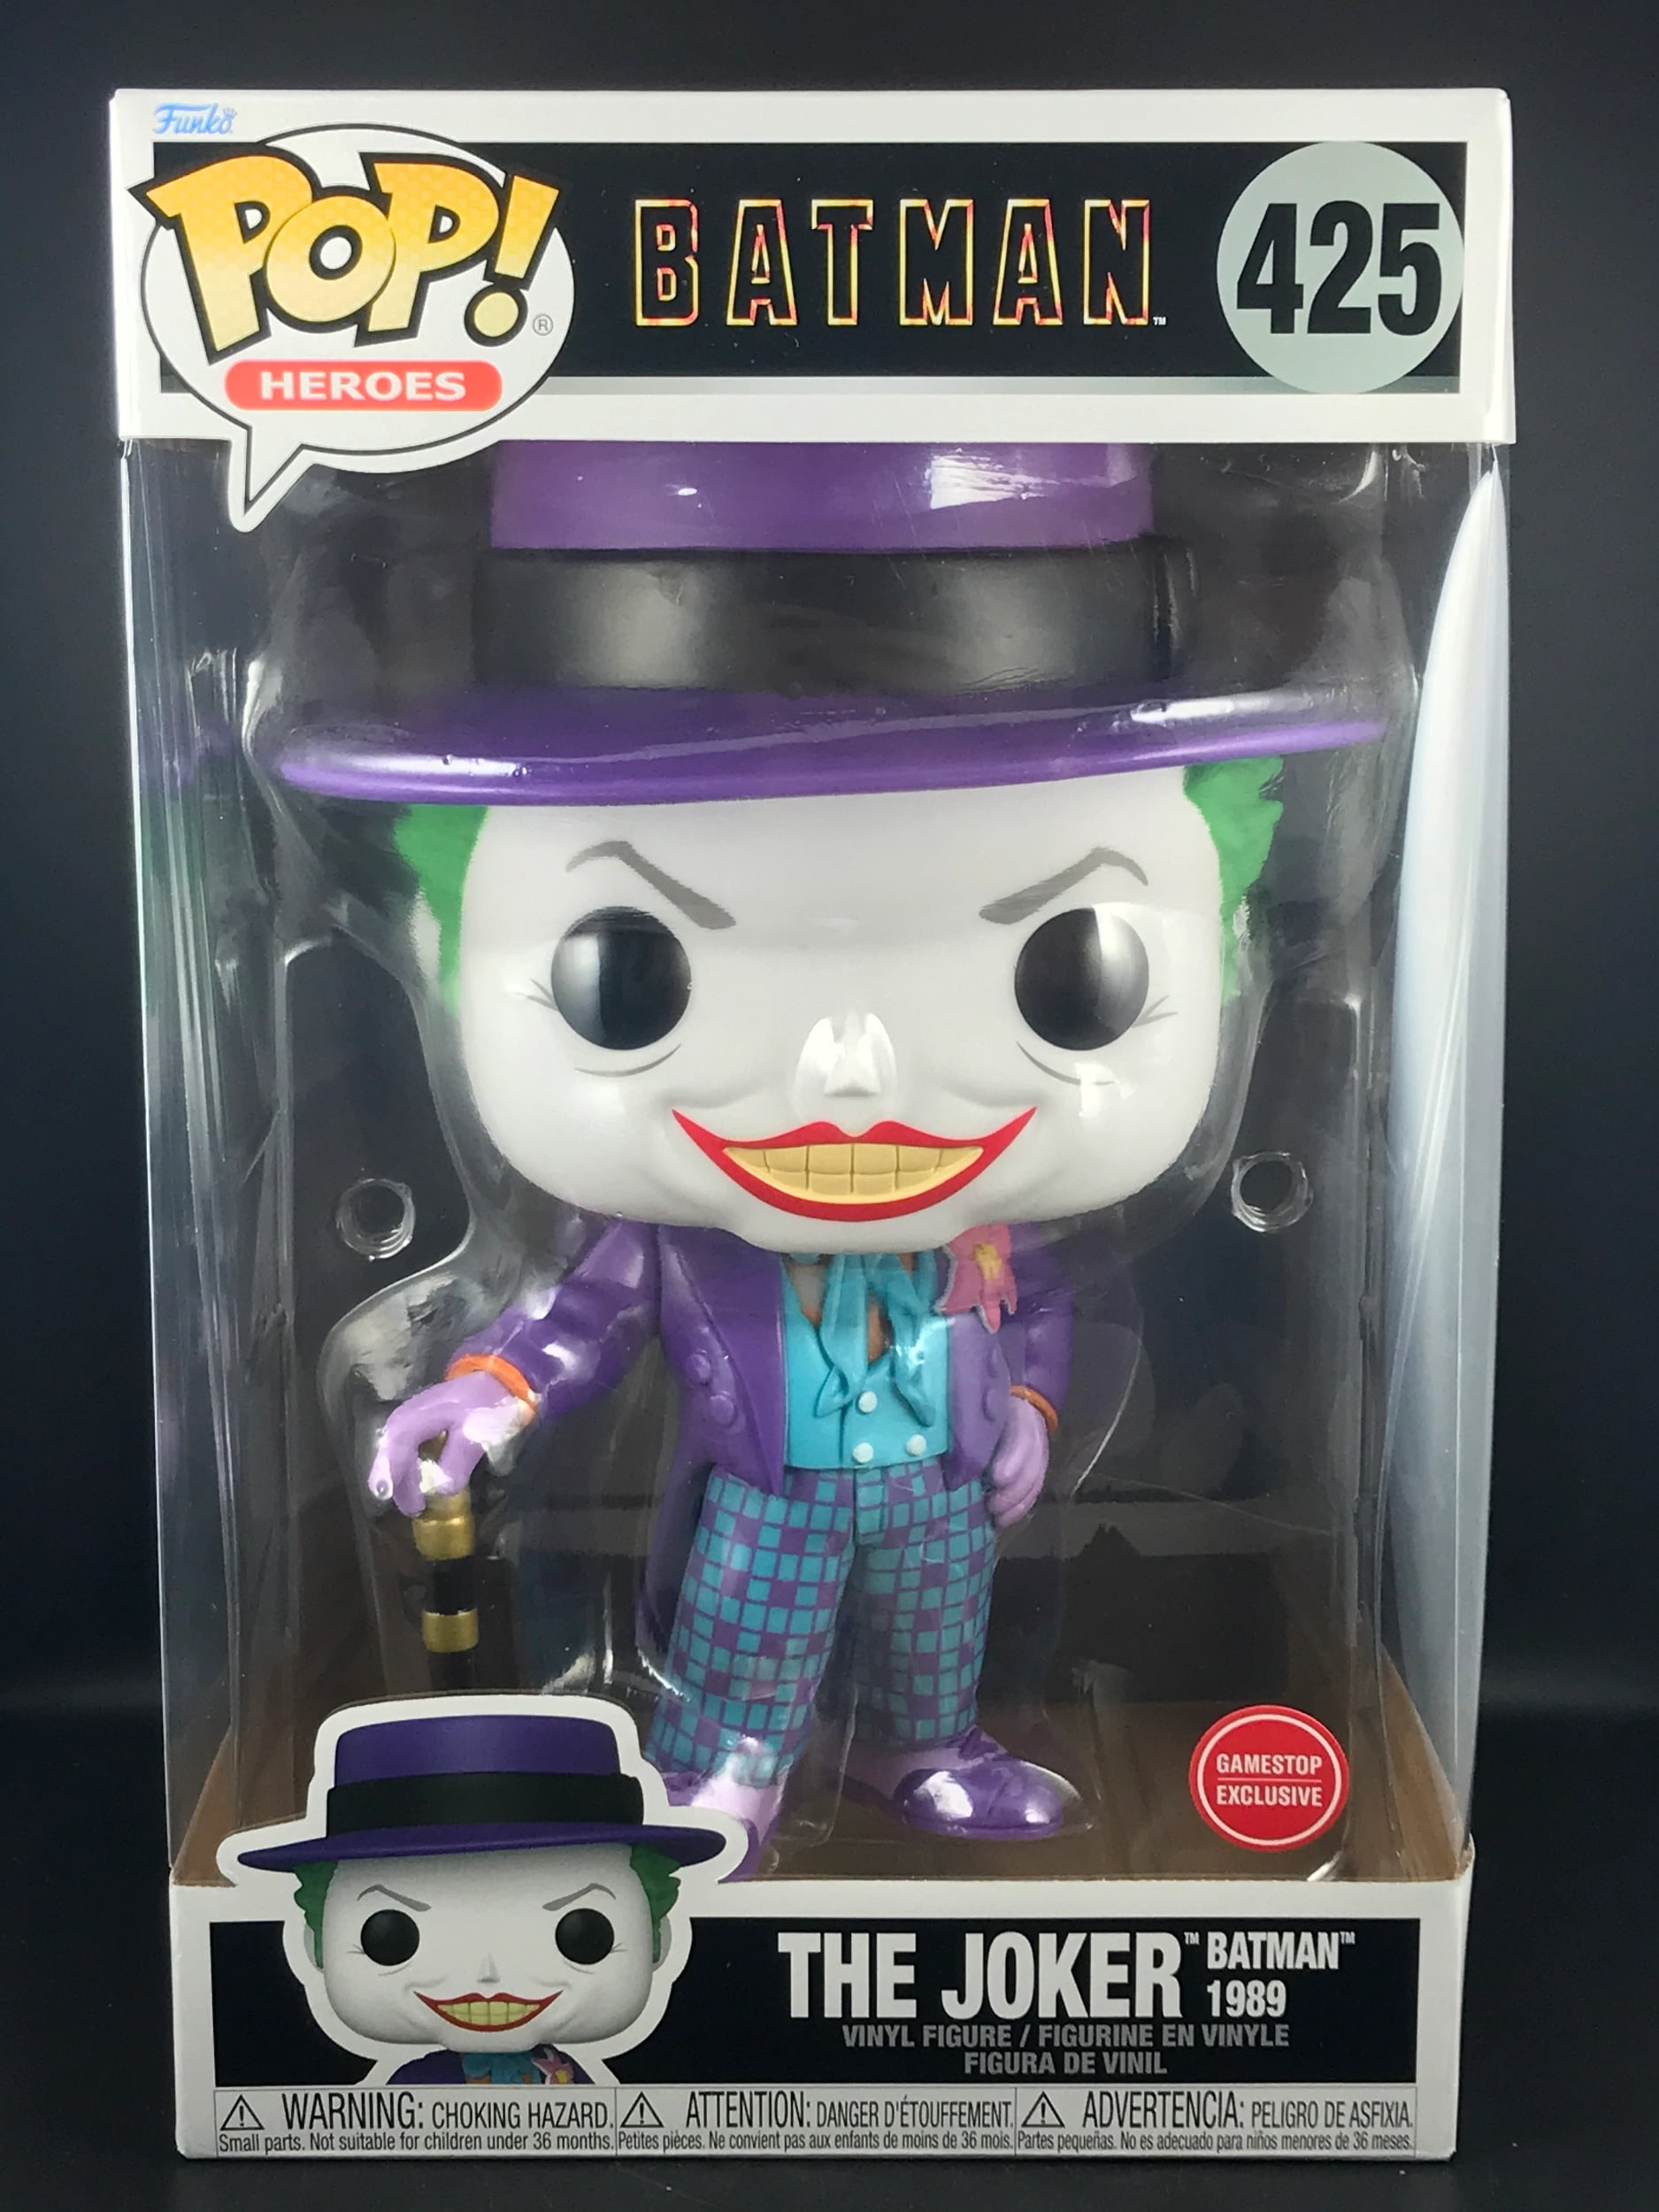 The Joker 1989 Giant 10 inch Funko pop special edition